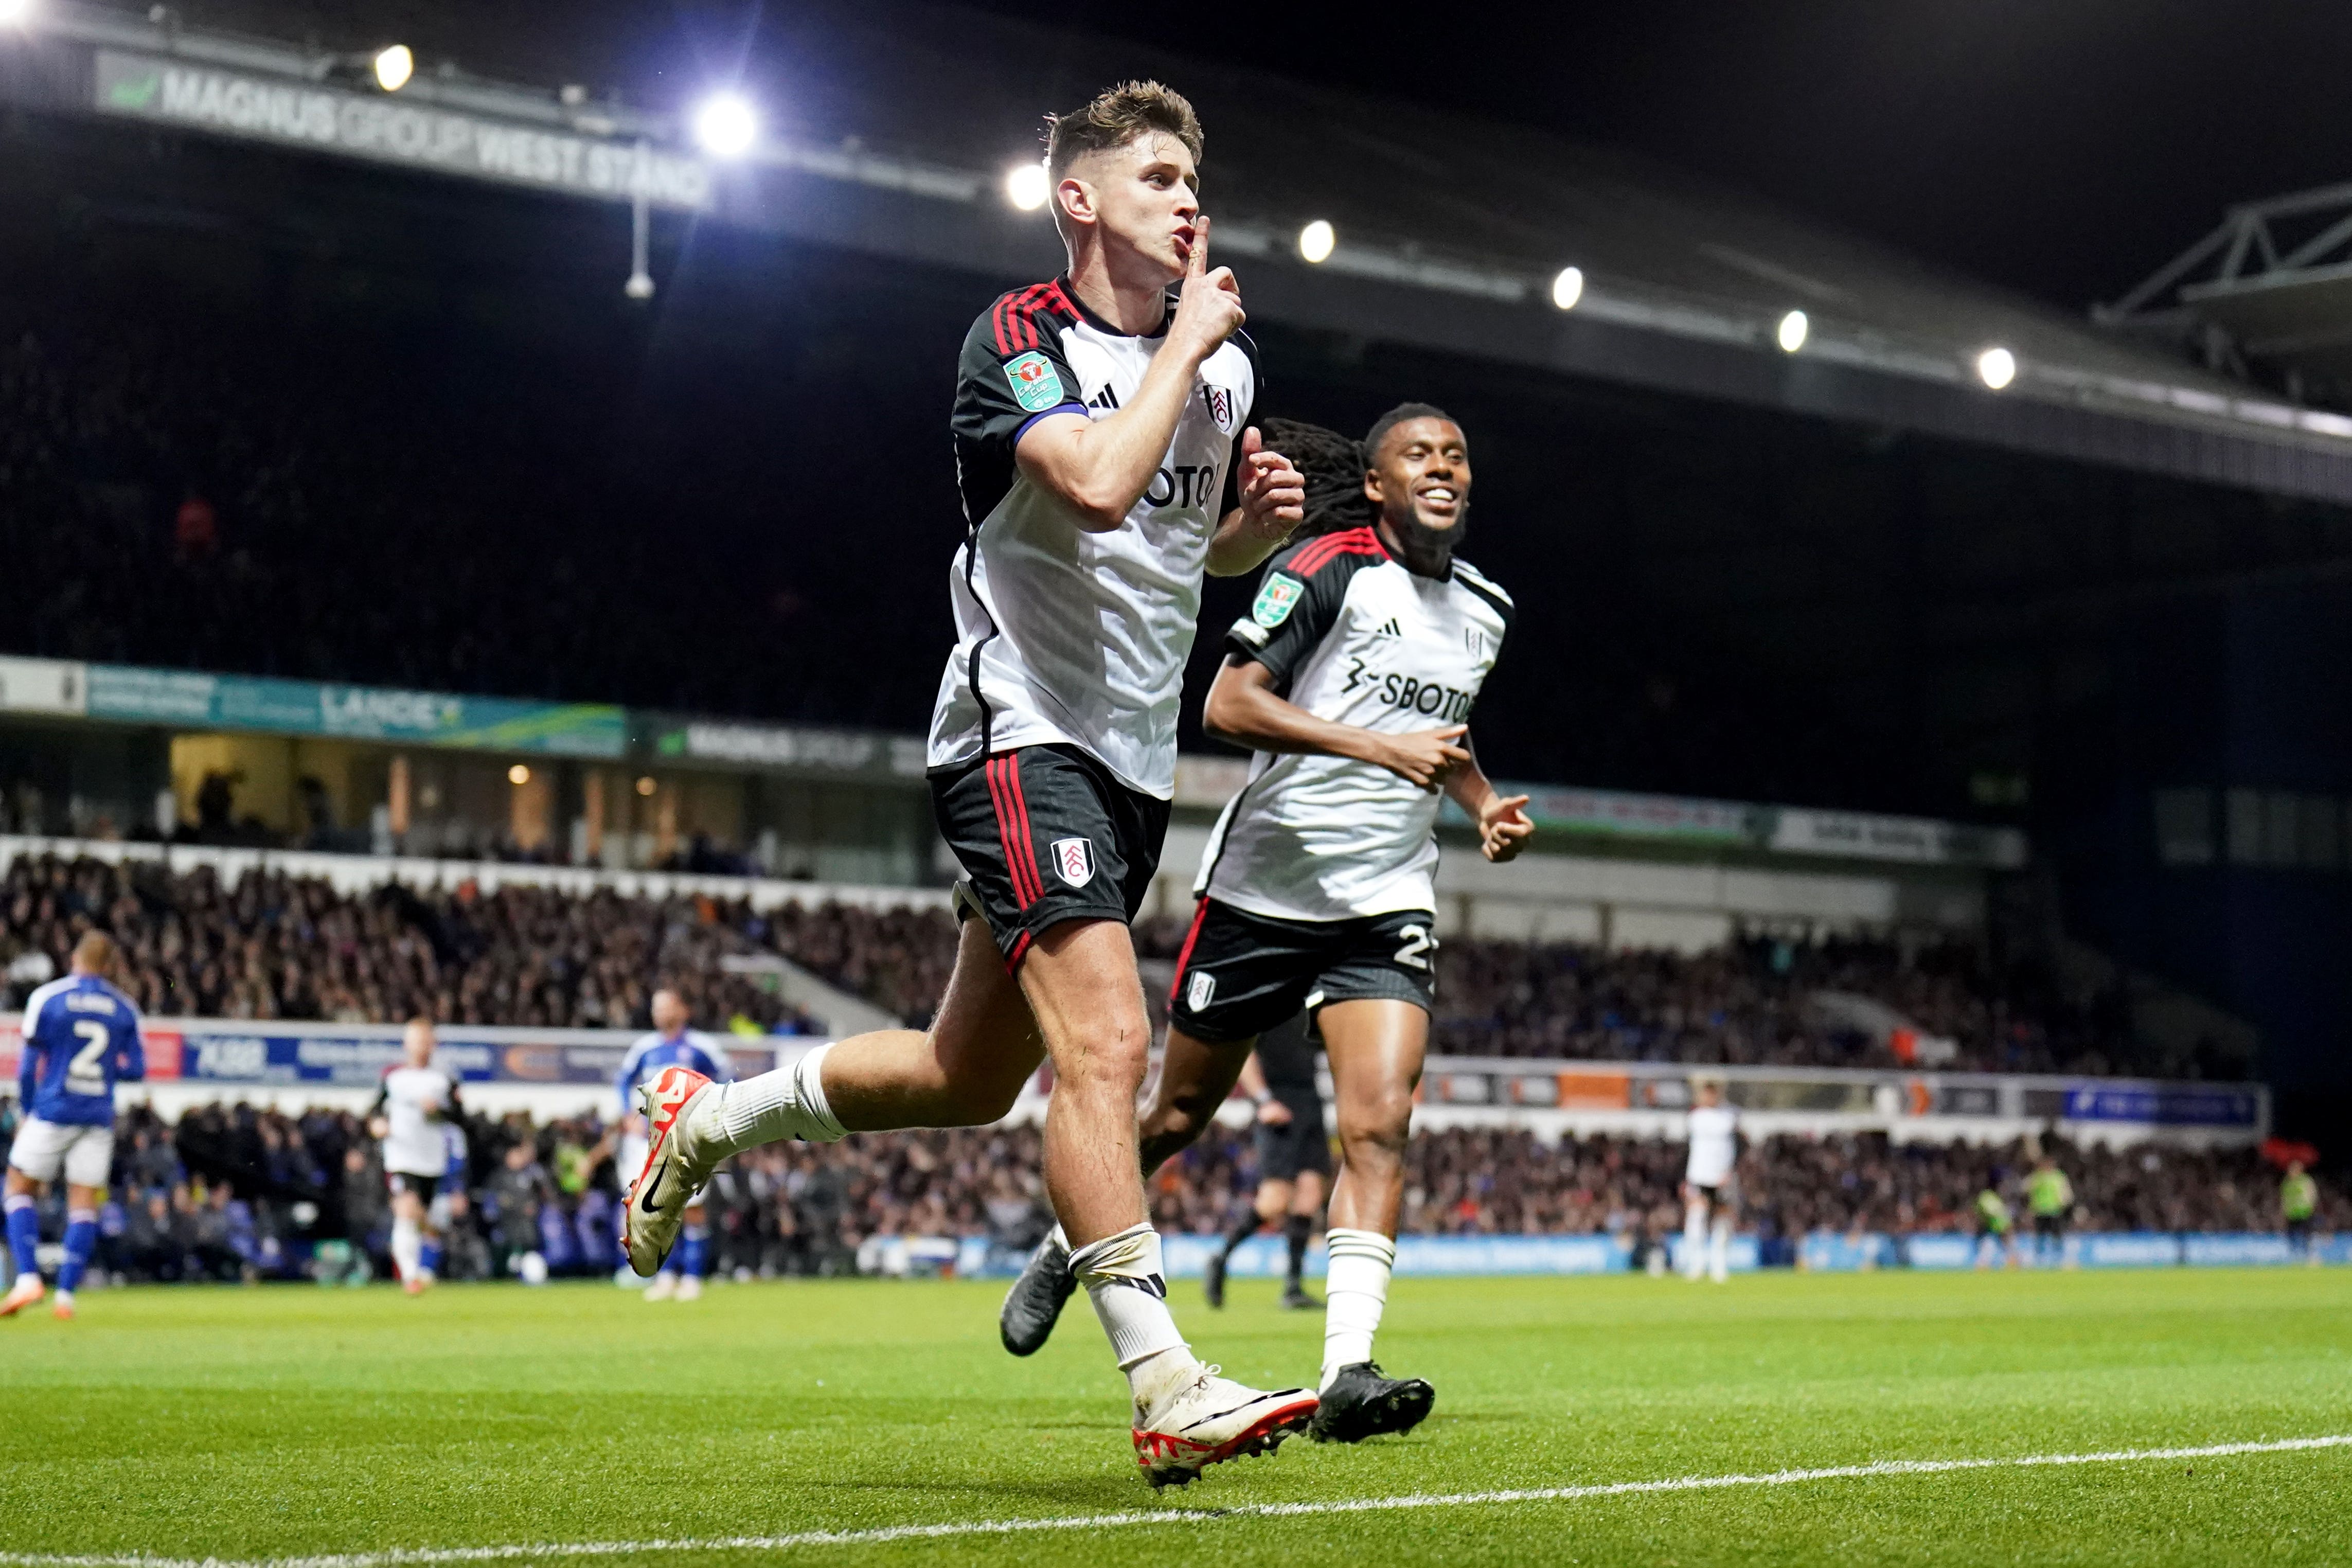 Fulham’s Tom Cairney celebrates scoring at Ipswich in the Carabao Cup (Zac Goodwin/PA)